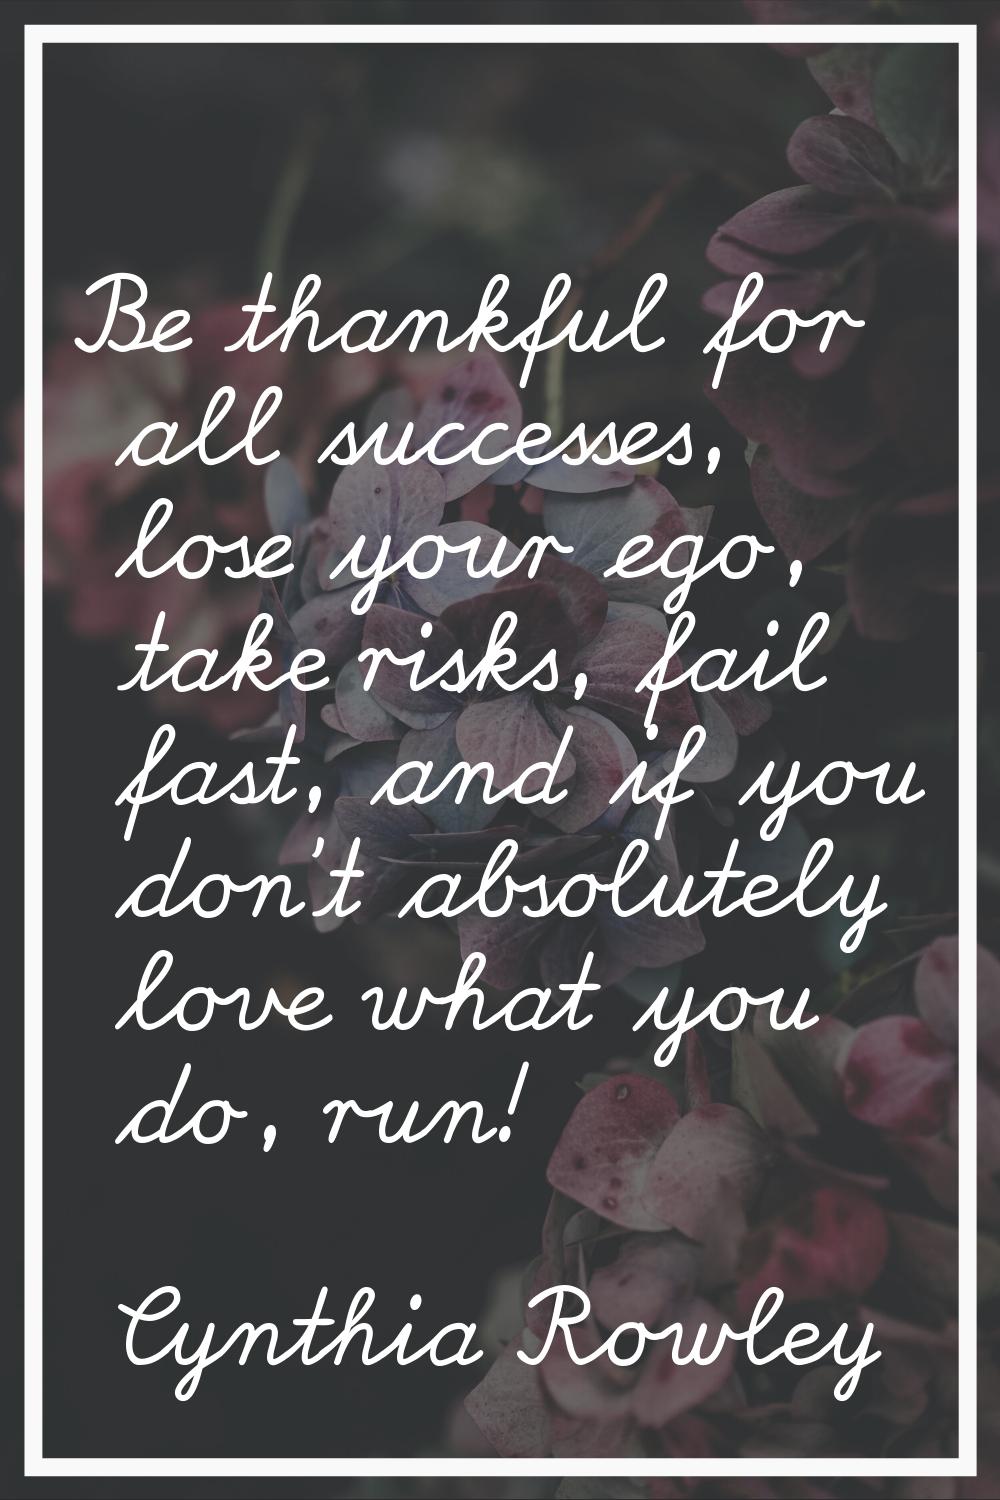 Be thankful for all successes, lose your ego, take risks, fail fast, and if you don't absolutely lo